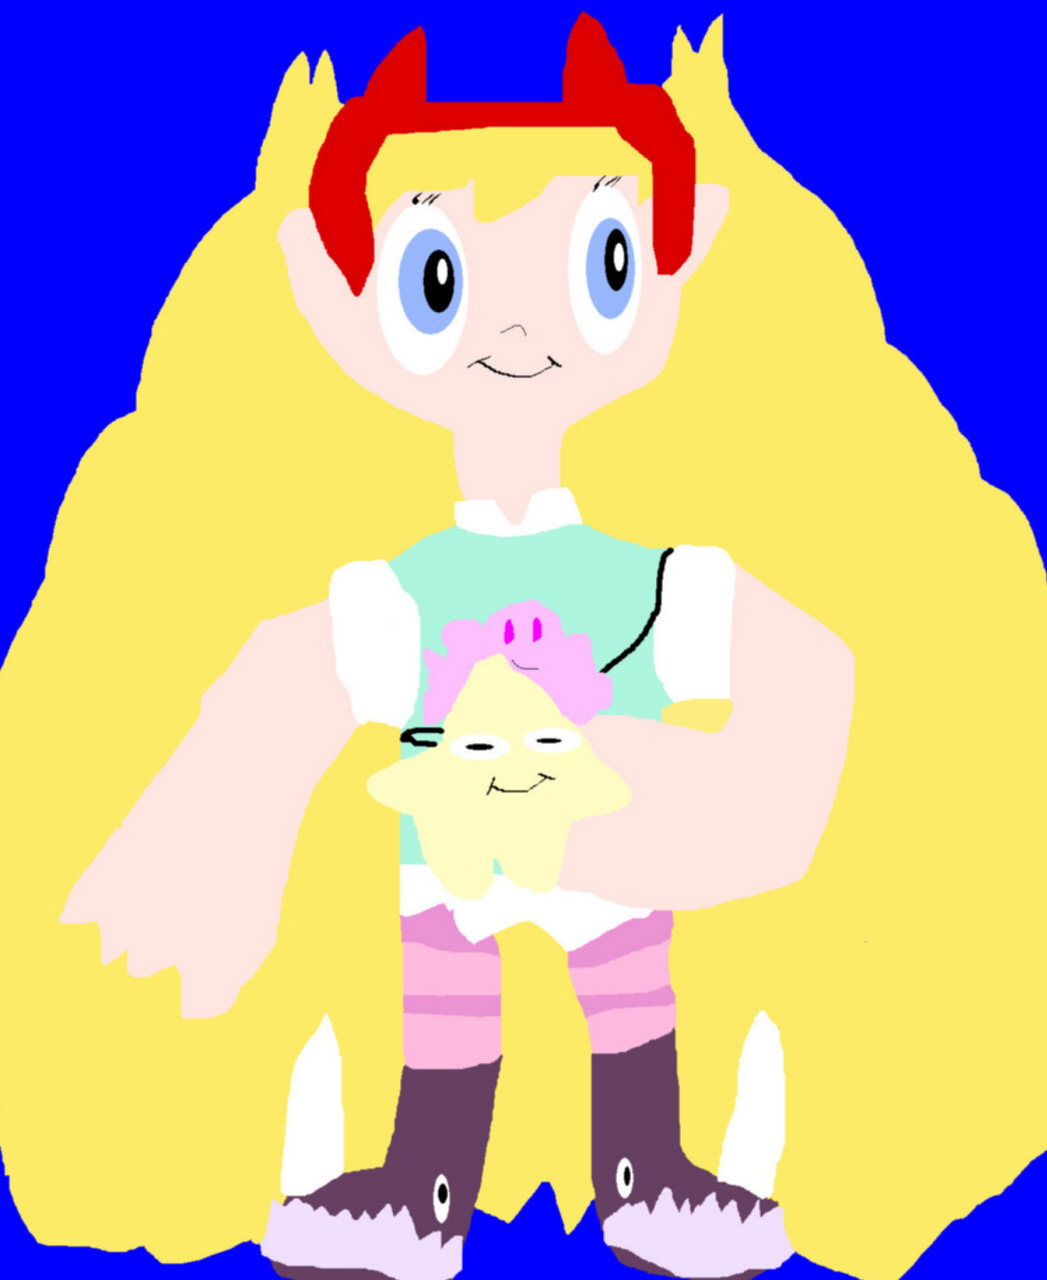 Star Butterfly Chibi Request MS Paint For STORMERS-ATTiTOONS Of Furaffinity by Falconlobo